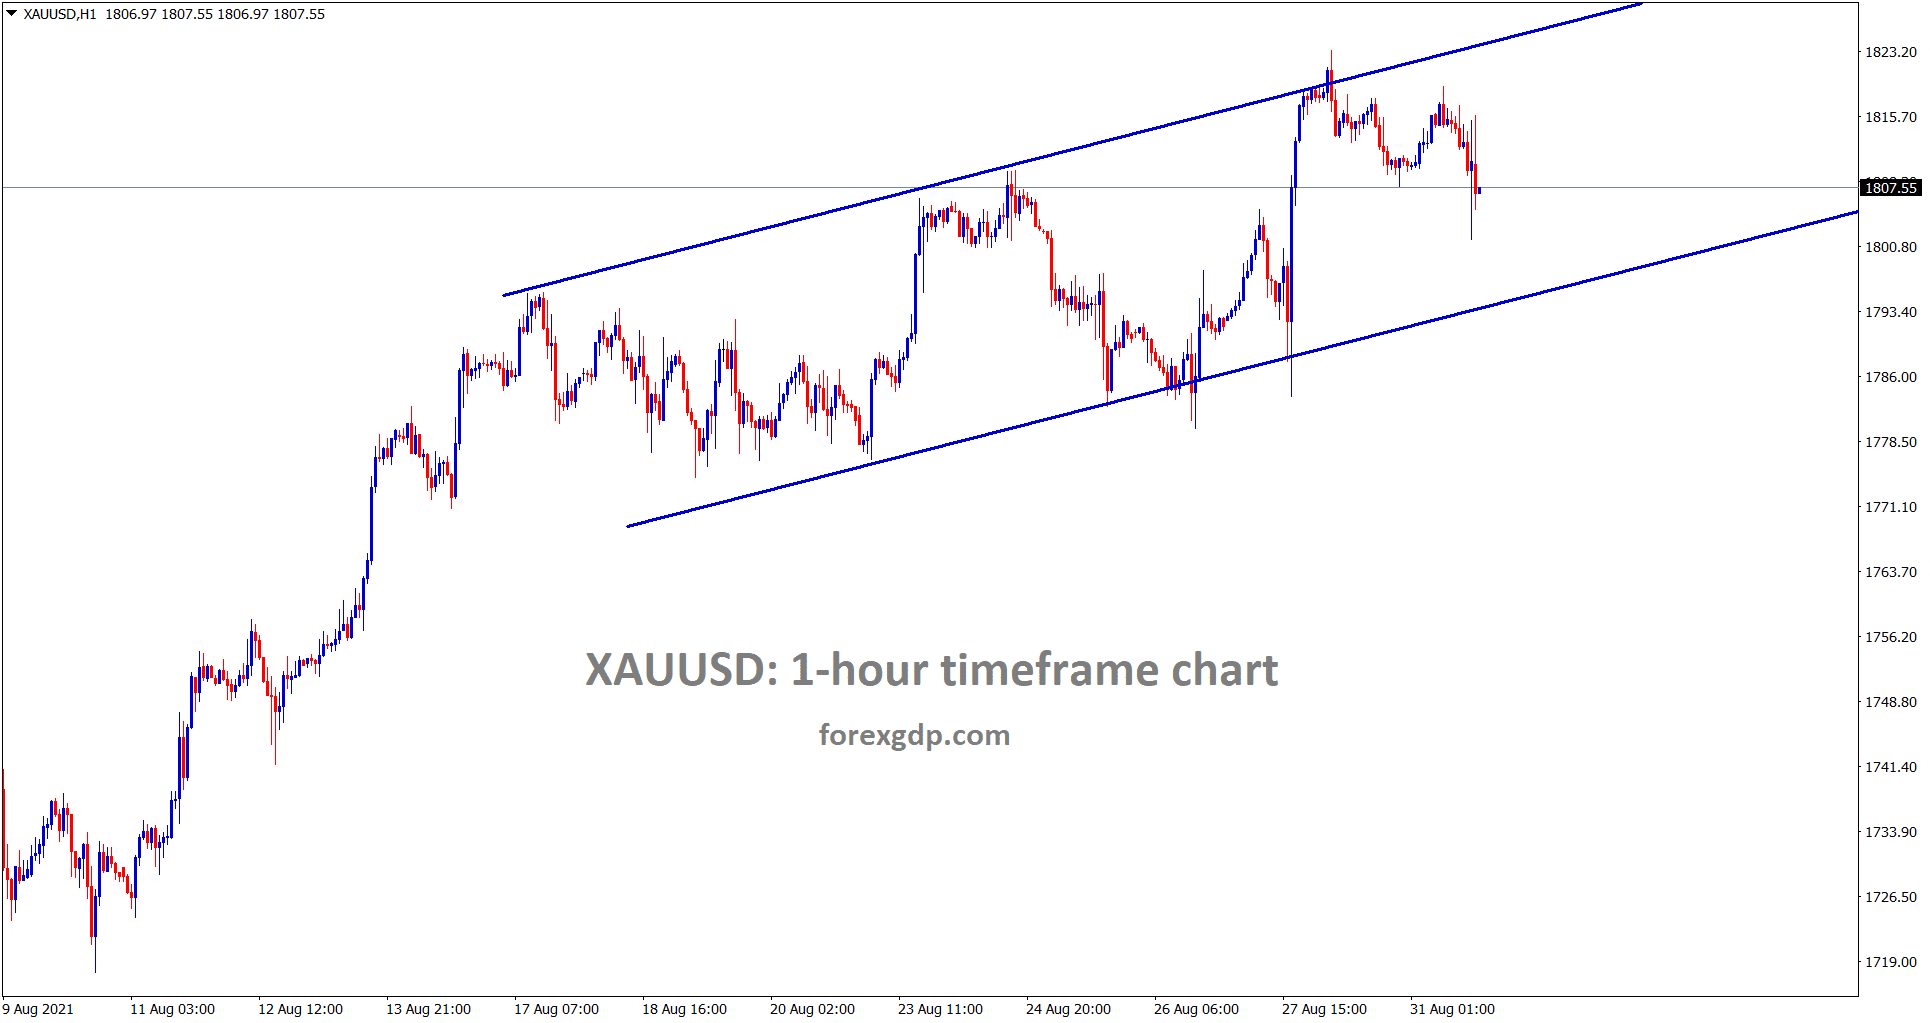 Gold price is moving in an Ascending channel in the 1 hour timeframe